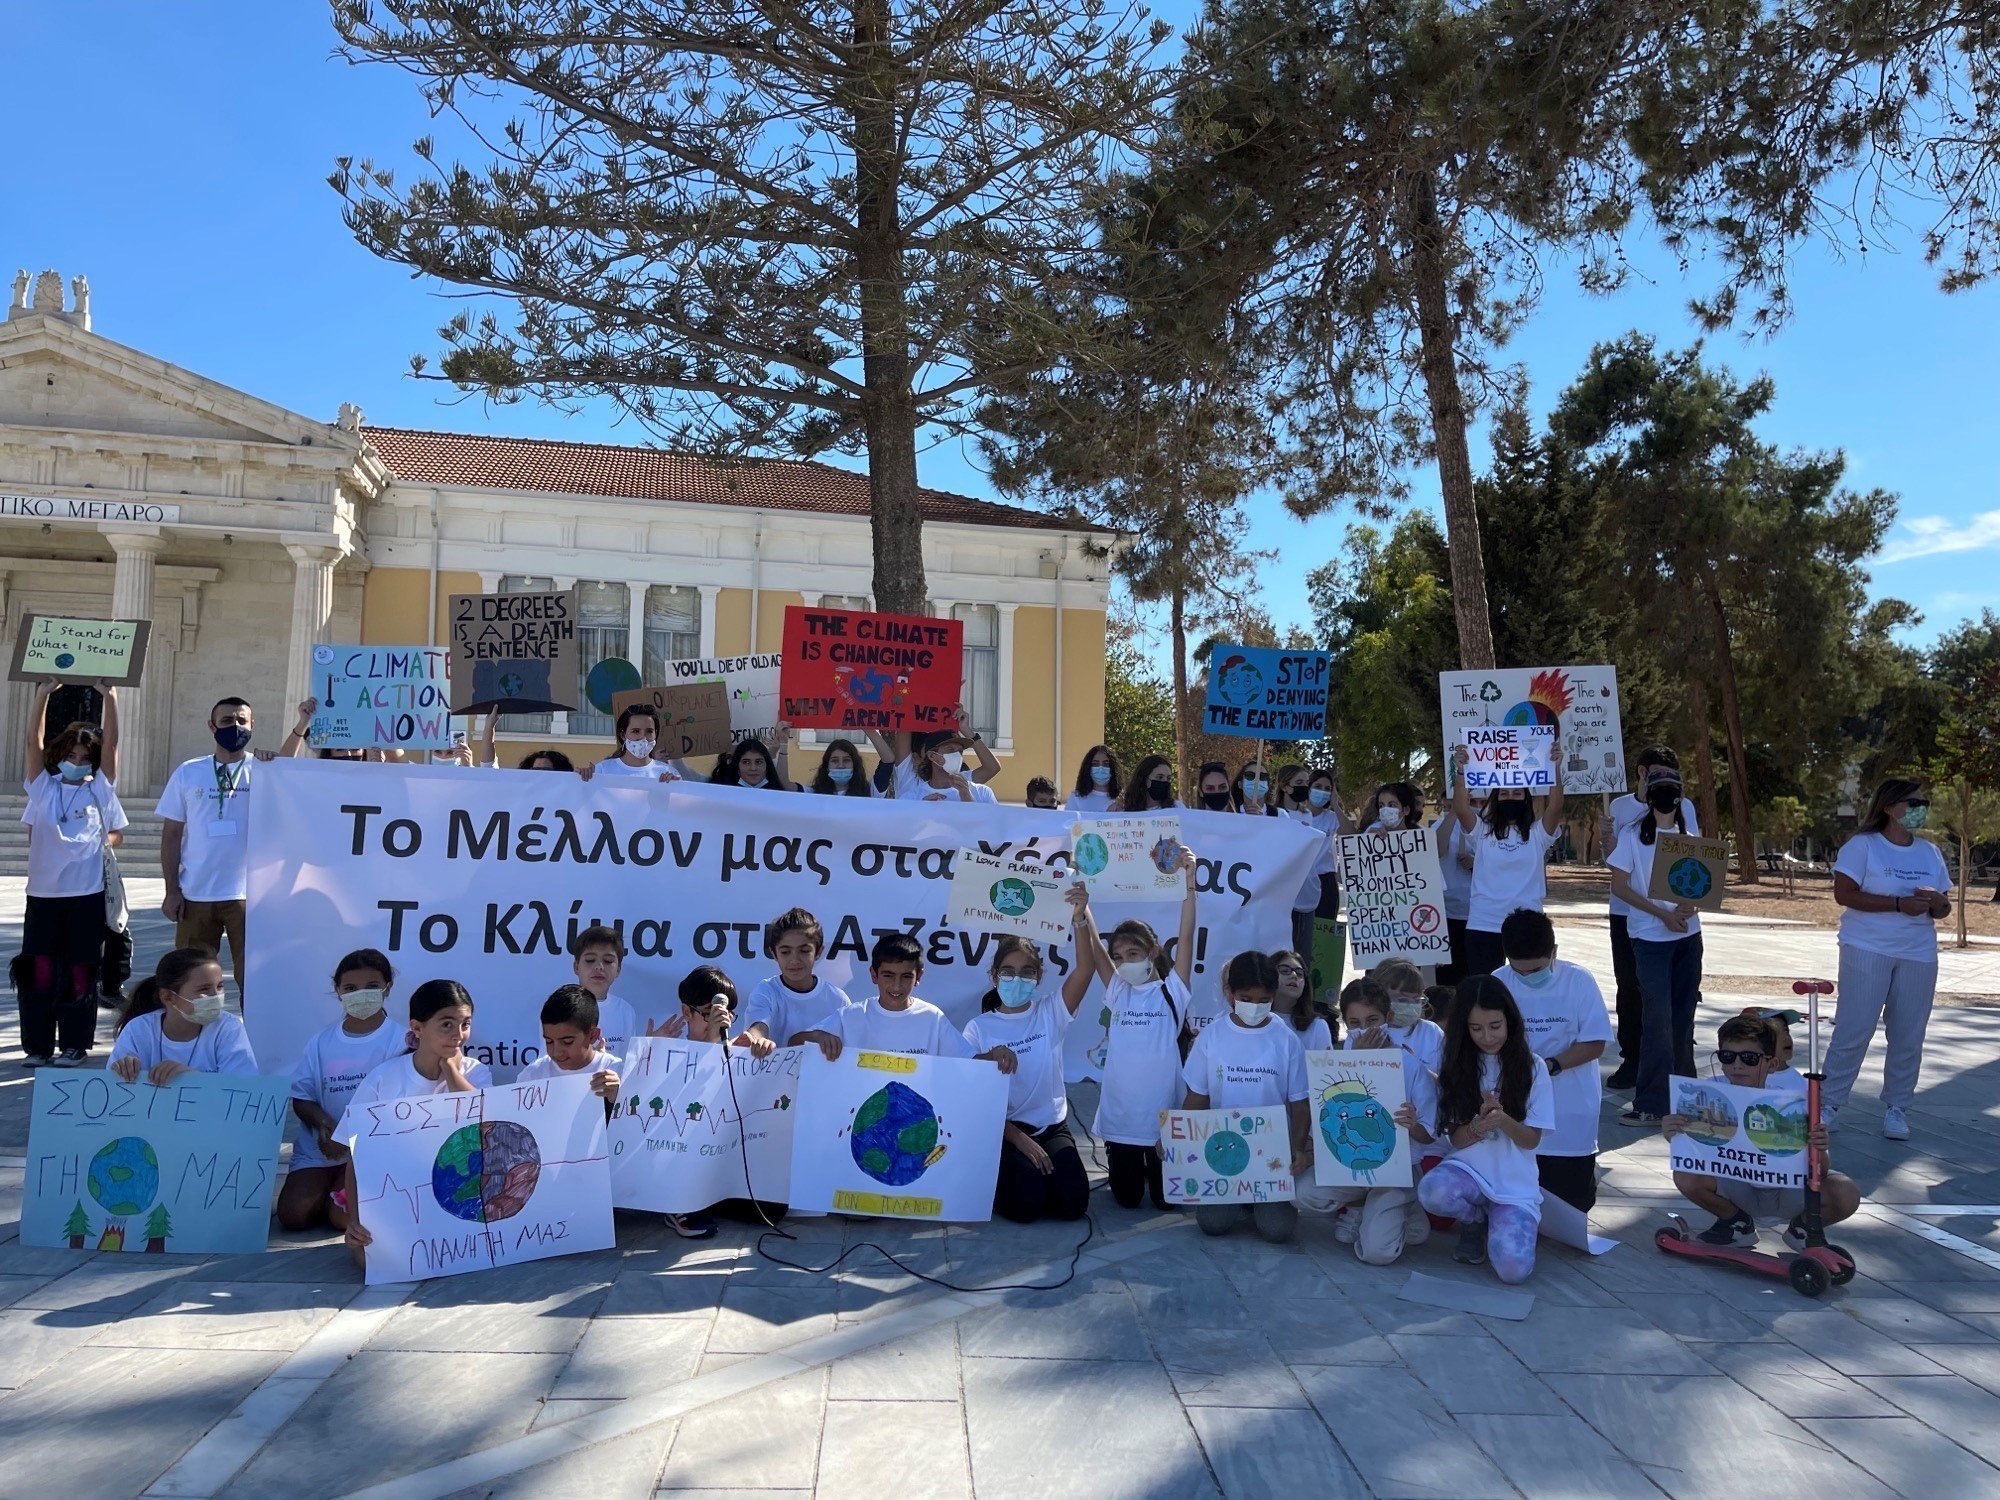 The youth of Cyprus has a voice and is claiming their future for a healthy planet